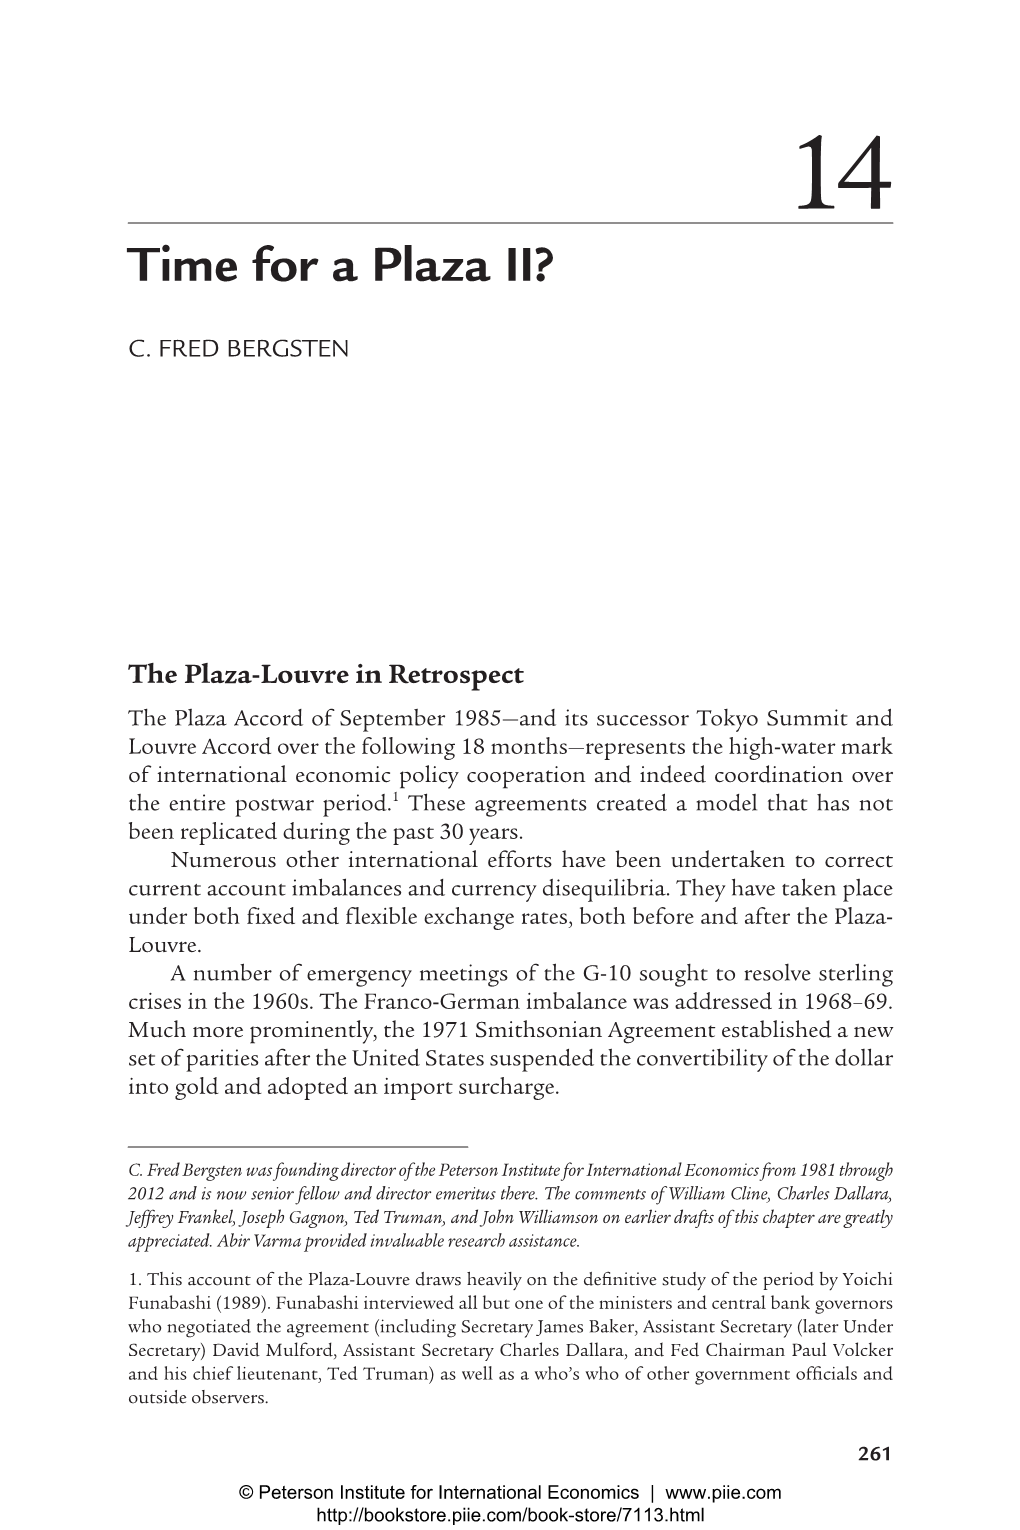 Time for a Plaza II?